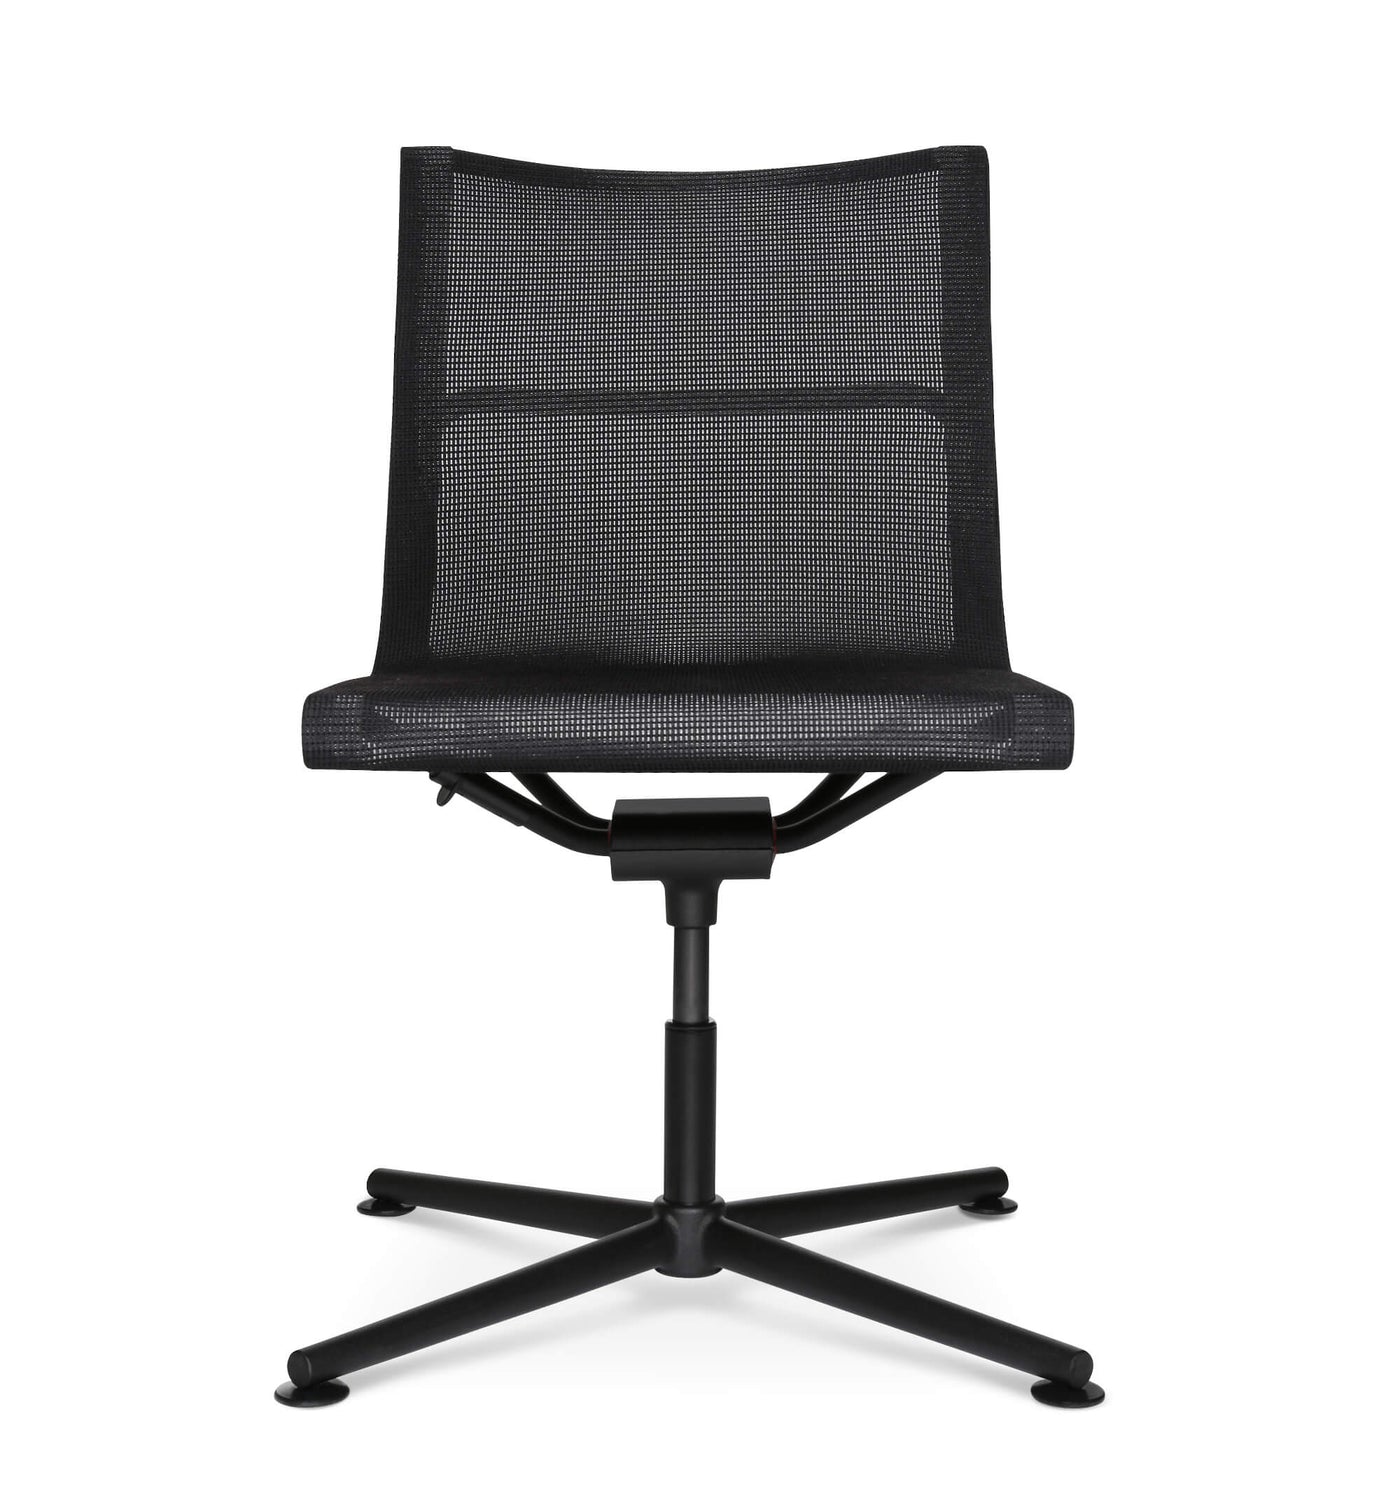 D1 Office visitor chair black with glides